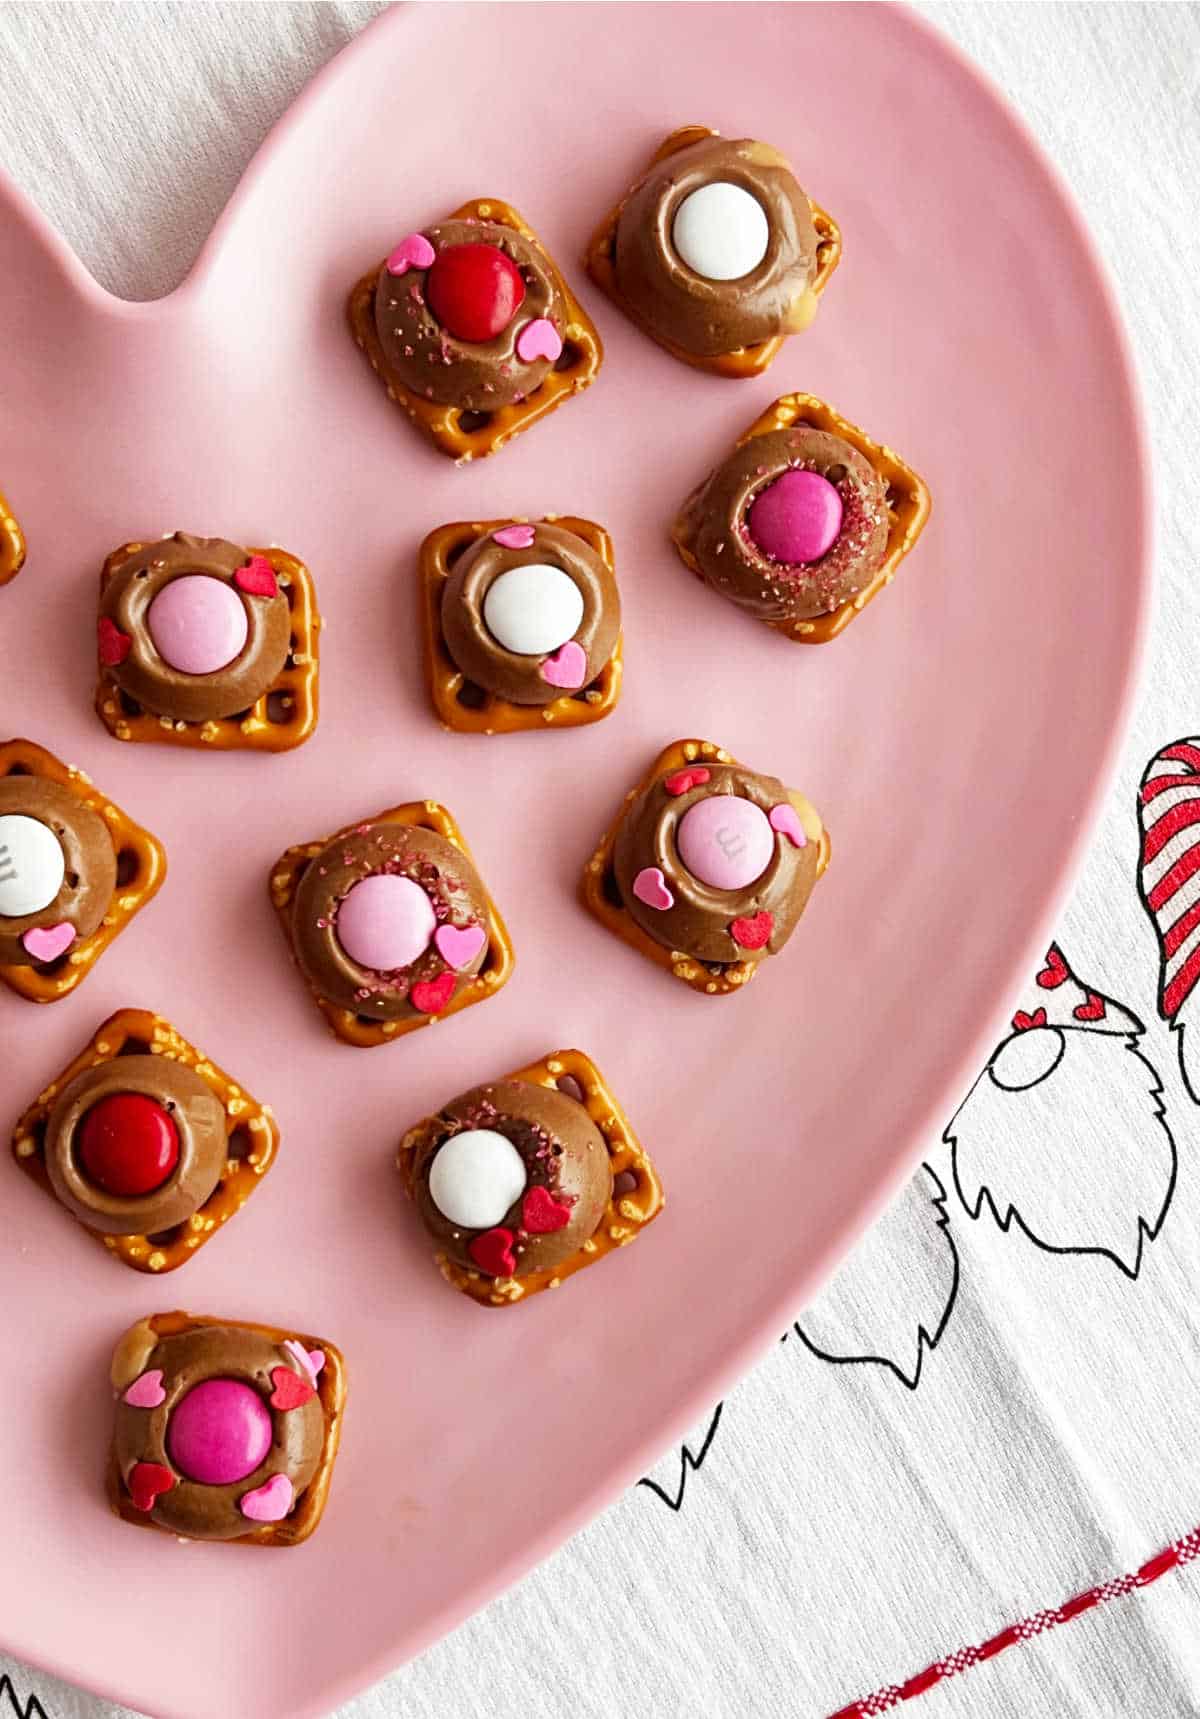 Rolos pretzel treats with Valentine's day candies on pink plate.